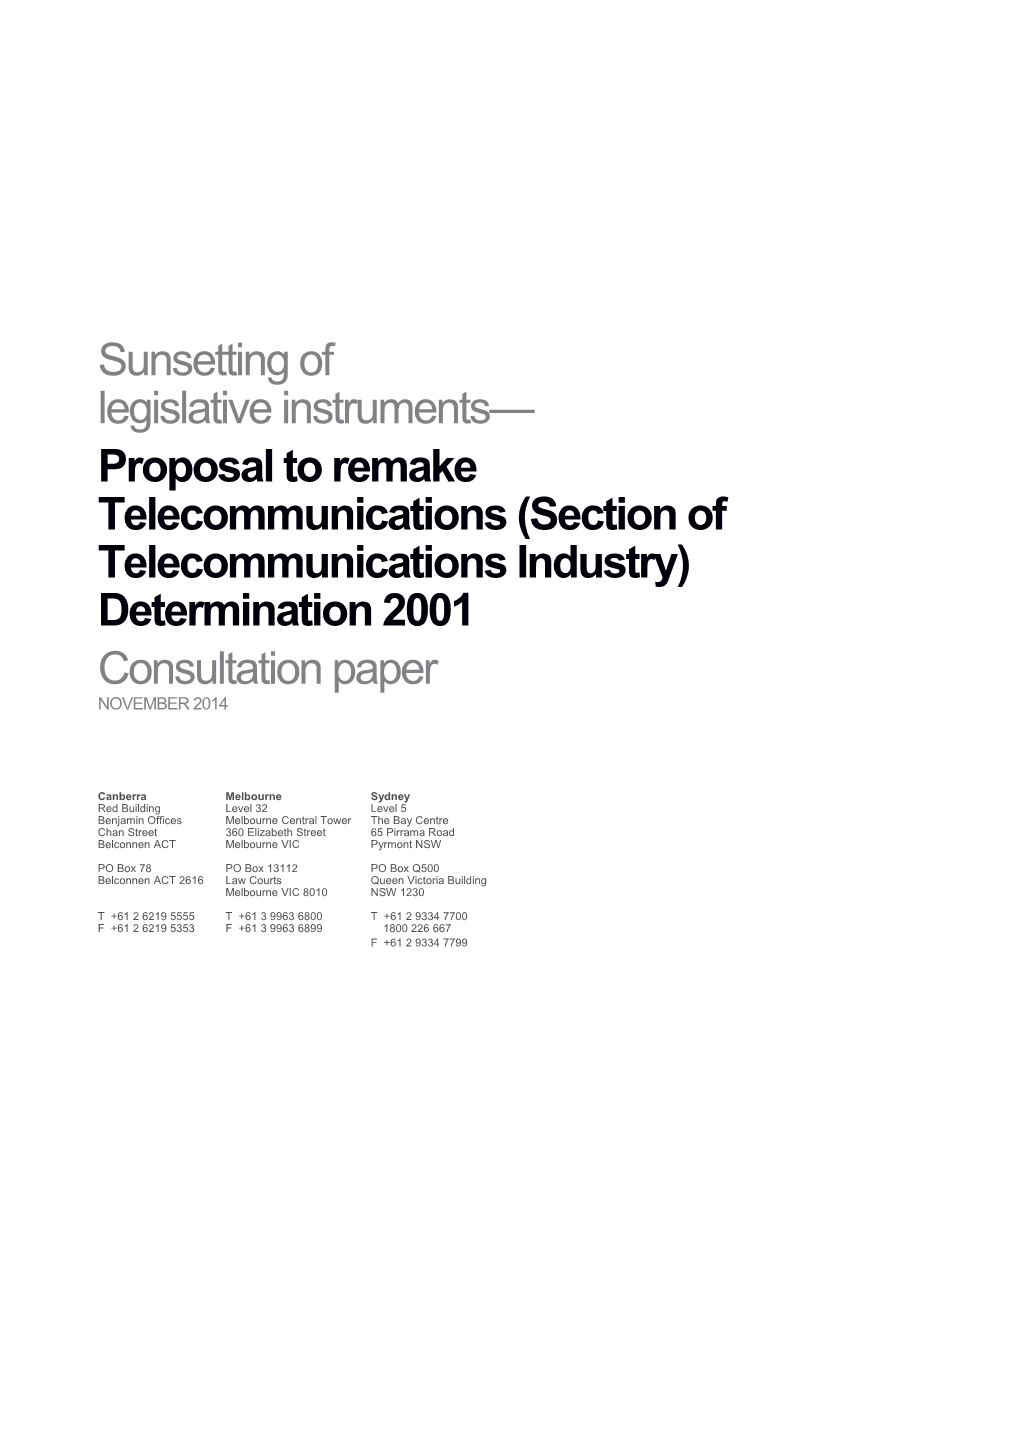 Brief Explanation of the Telecommunications (Section of the Telecommunications Industry)